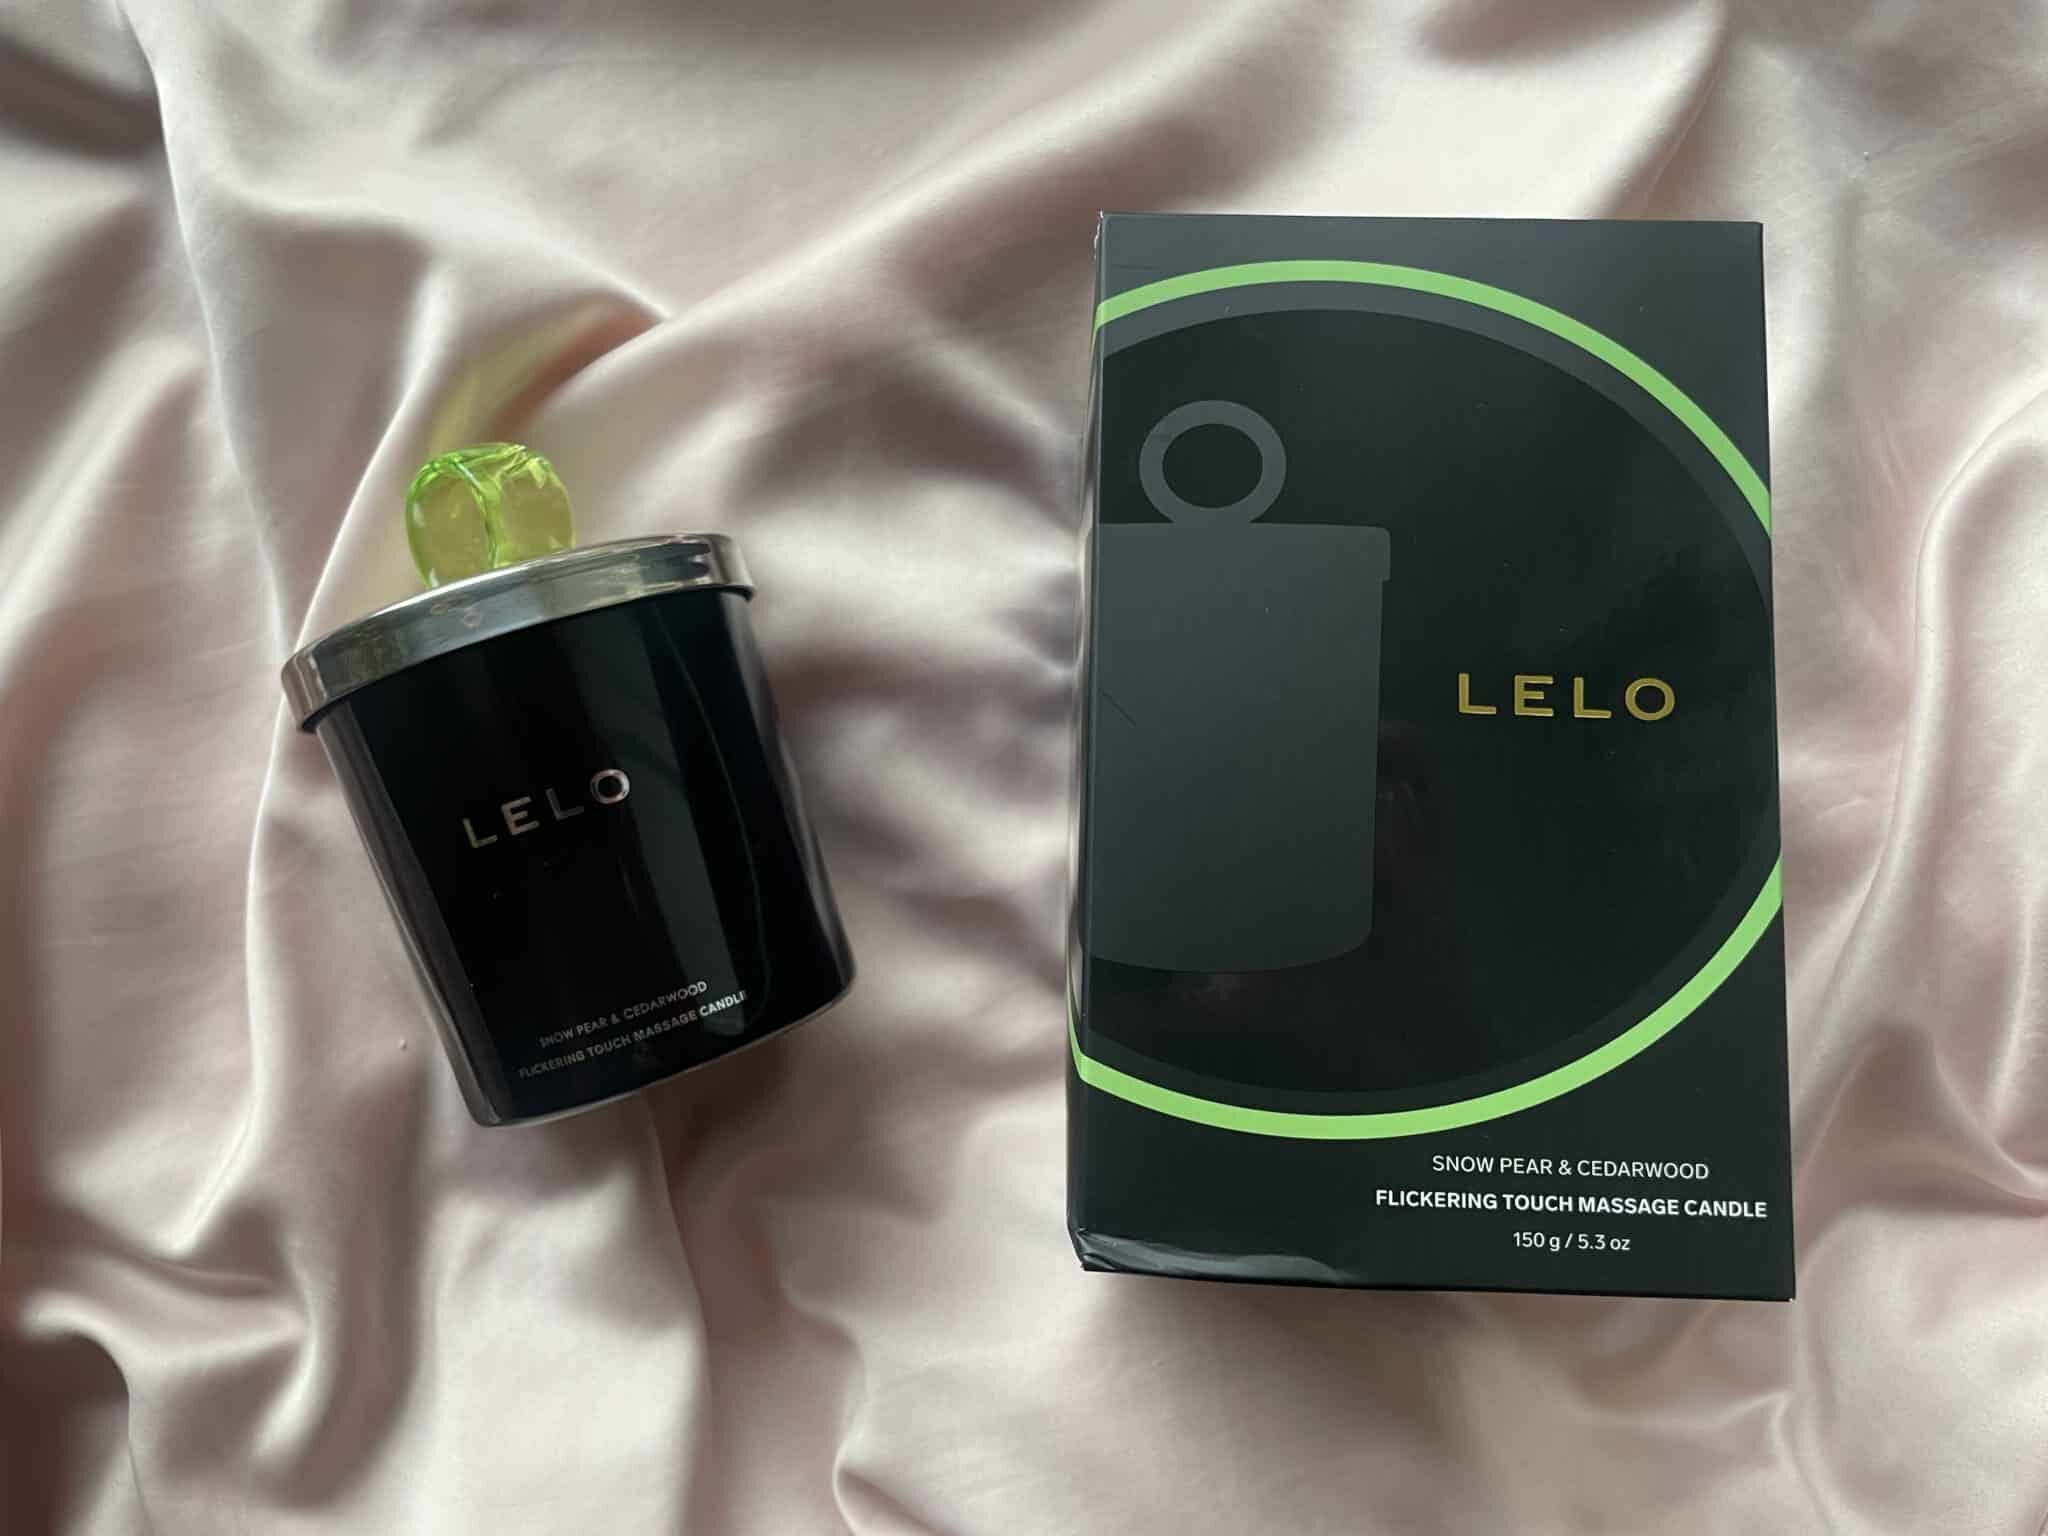 LELO Flickering Touch Massage Candle. Slide 9